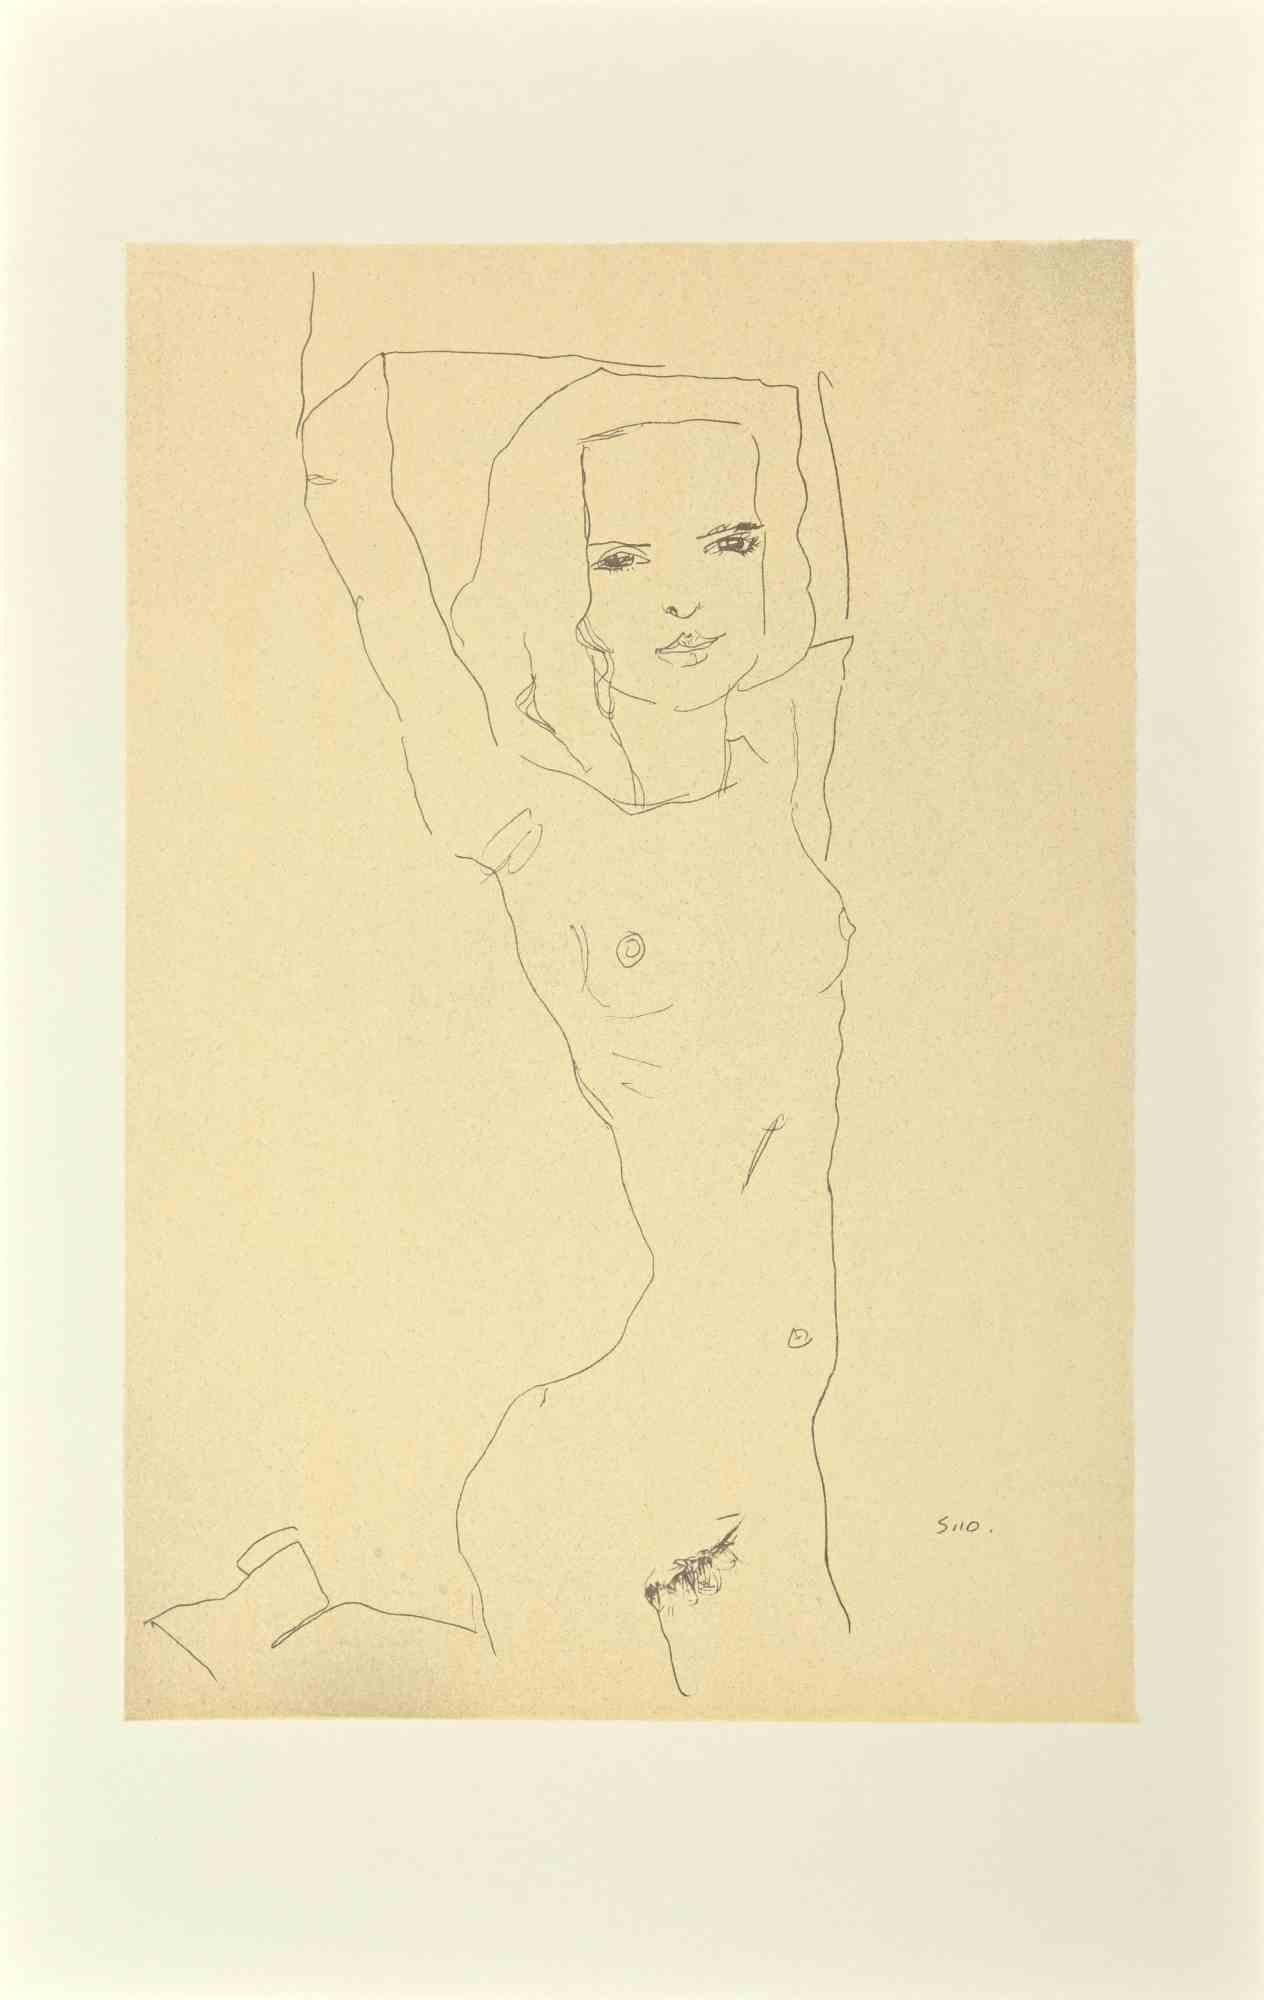 Egon Schiele Portrait Print - Nude Girl with Raised Arms  - Lithograph  - 2007